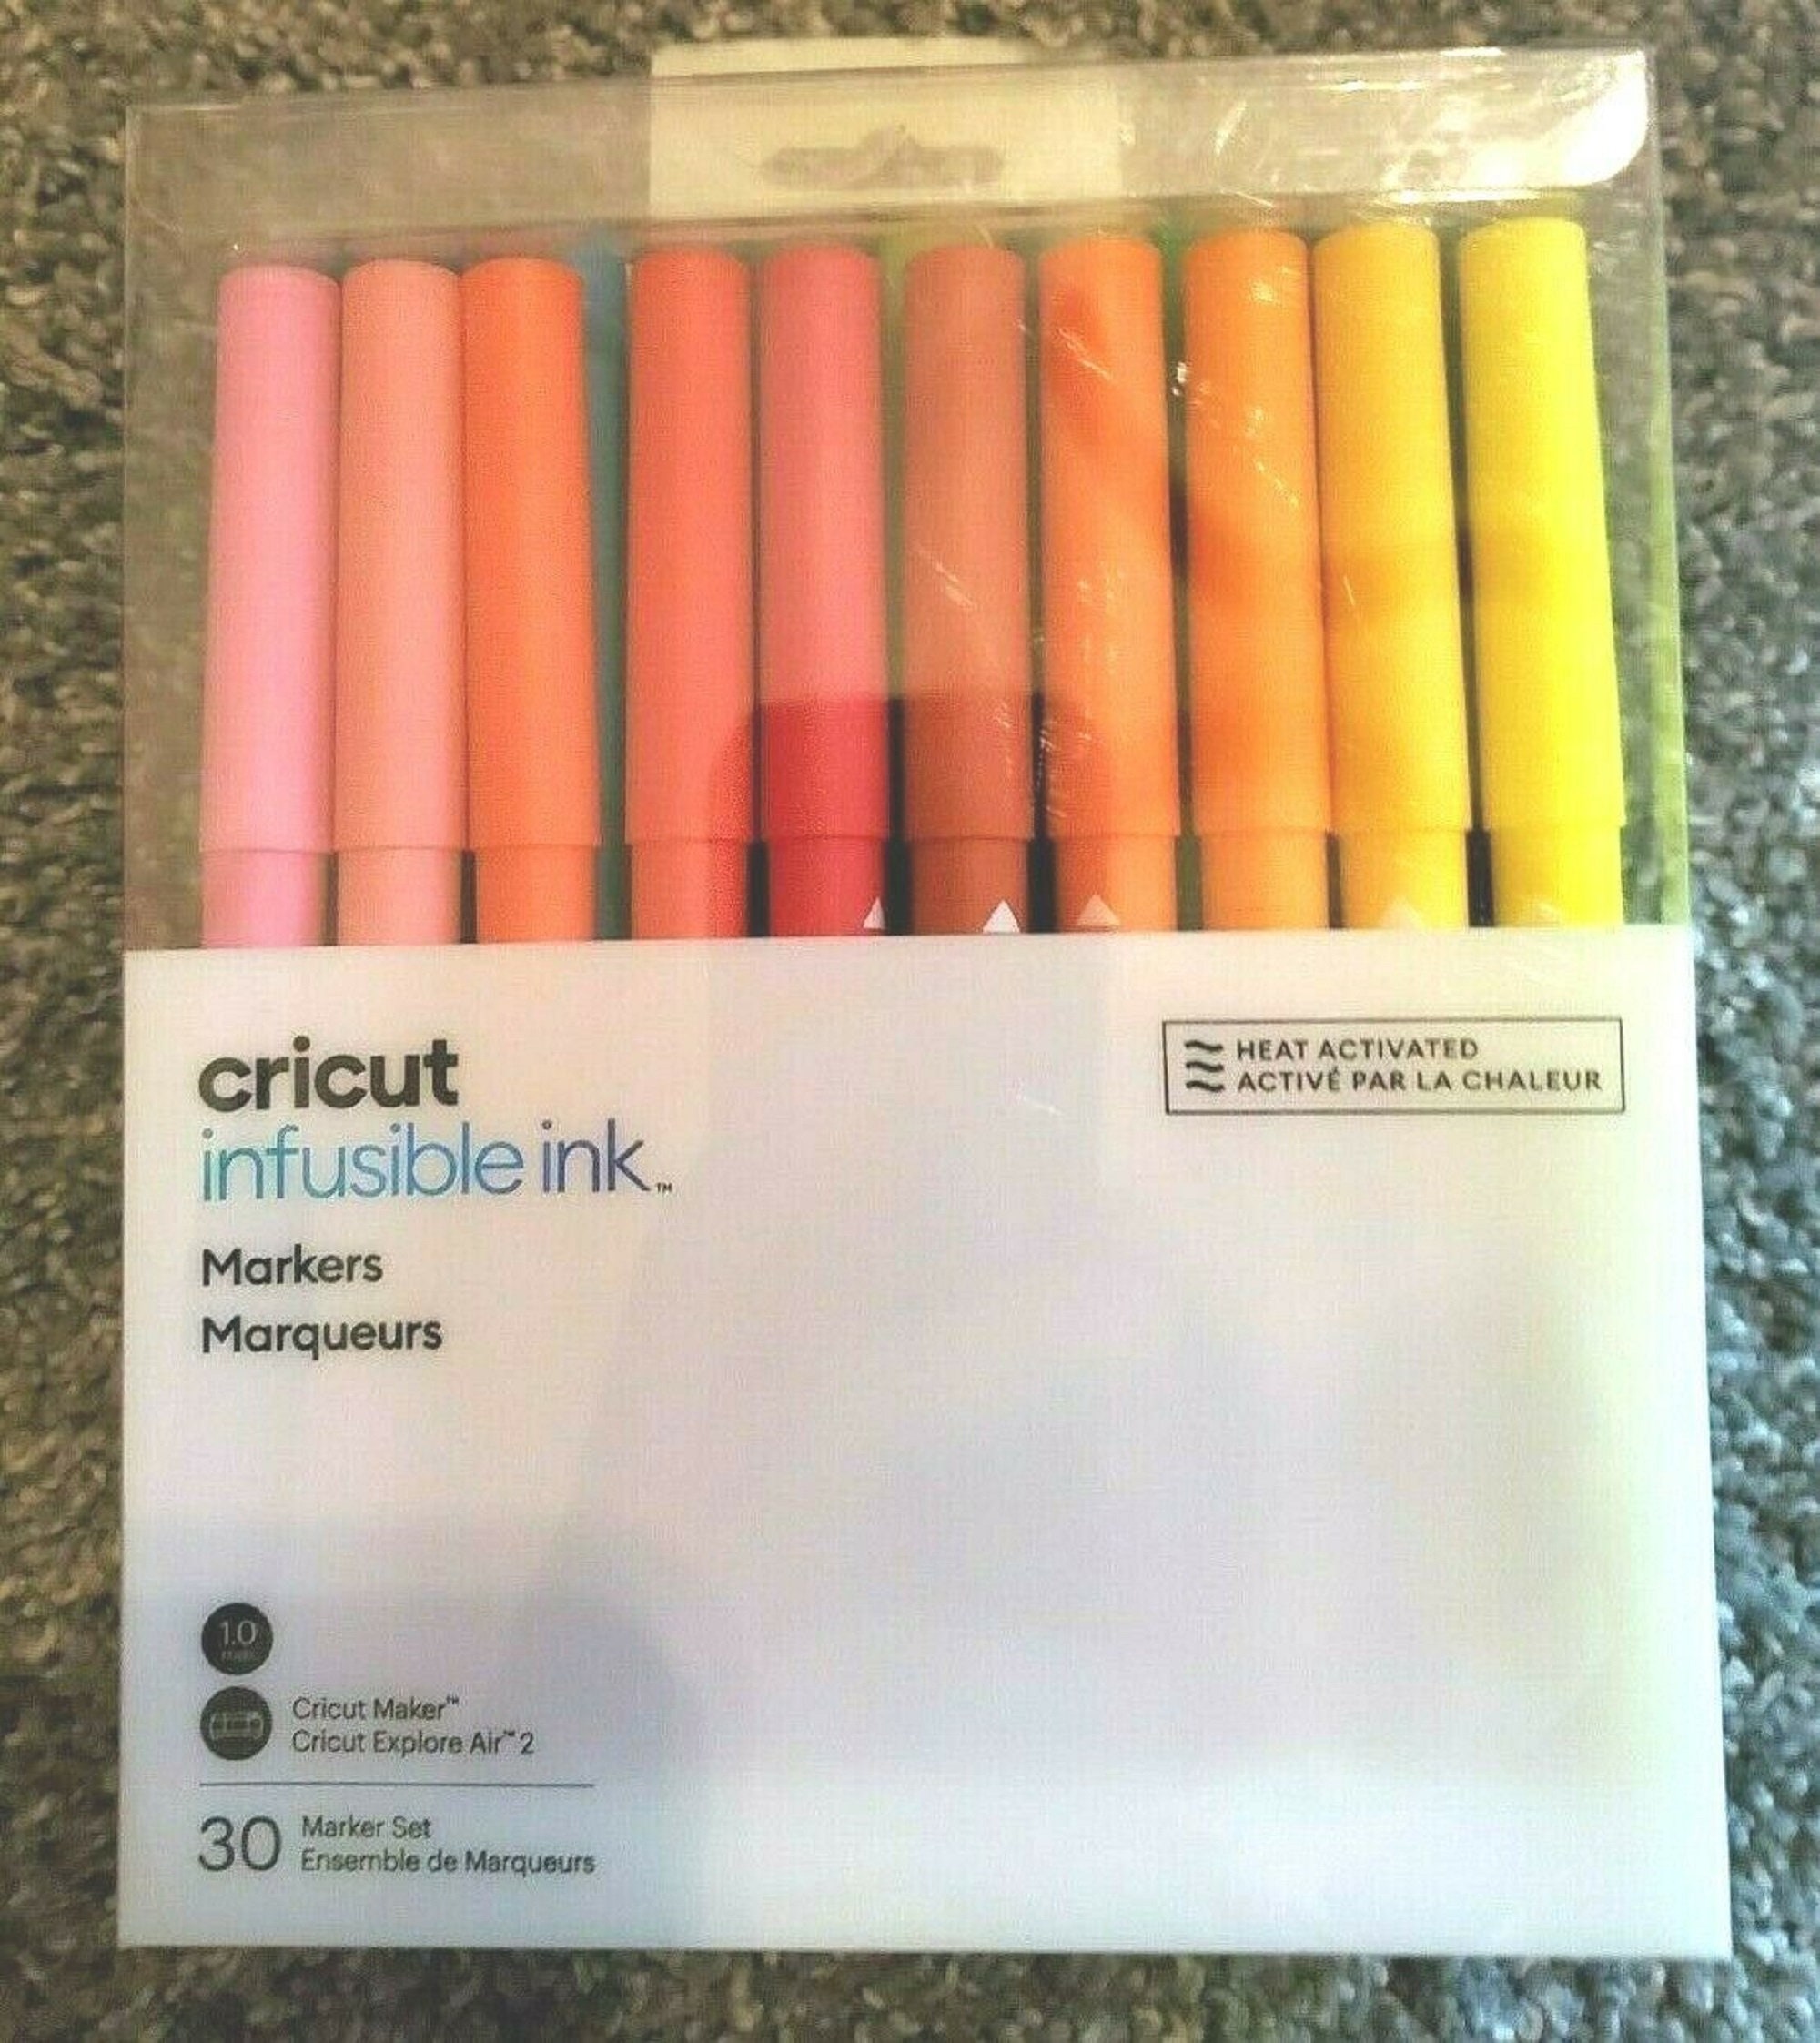 Cricut Infusible Ink Markers 15 Pack